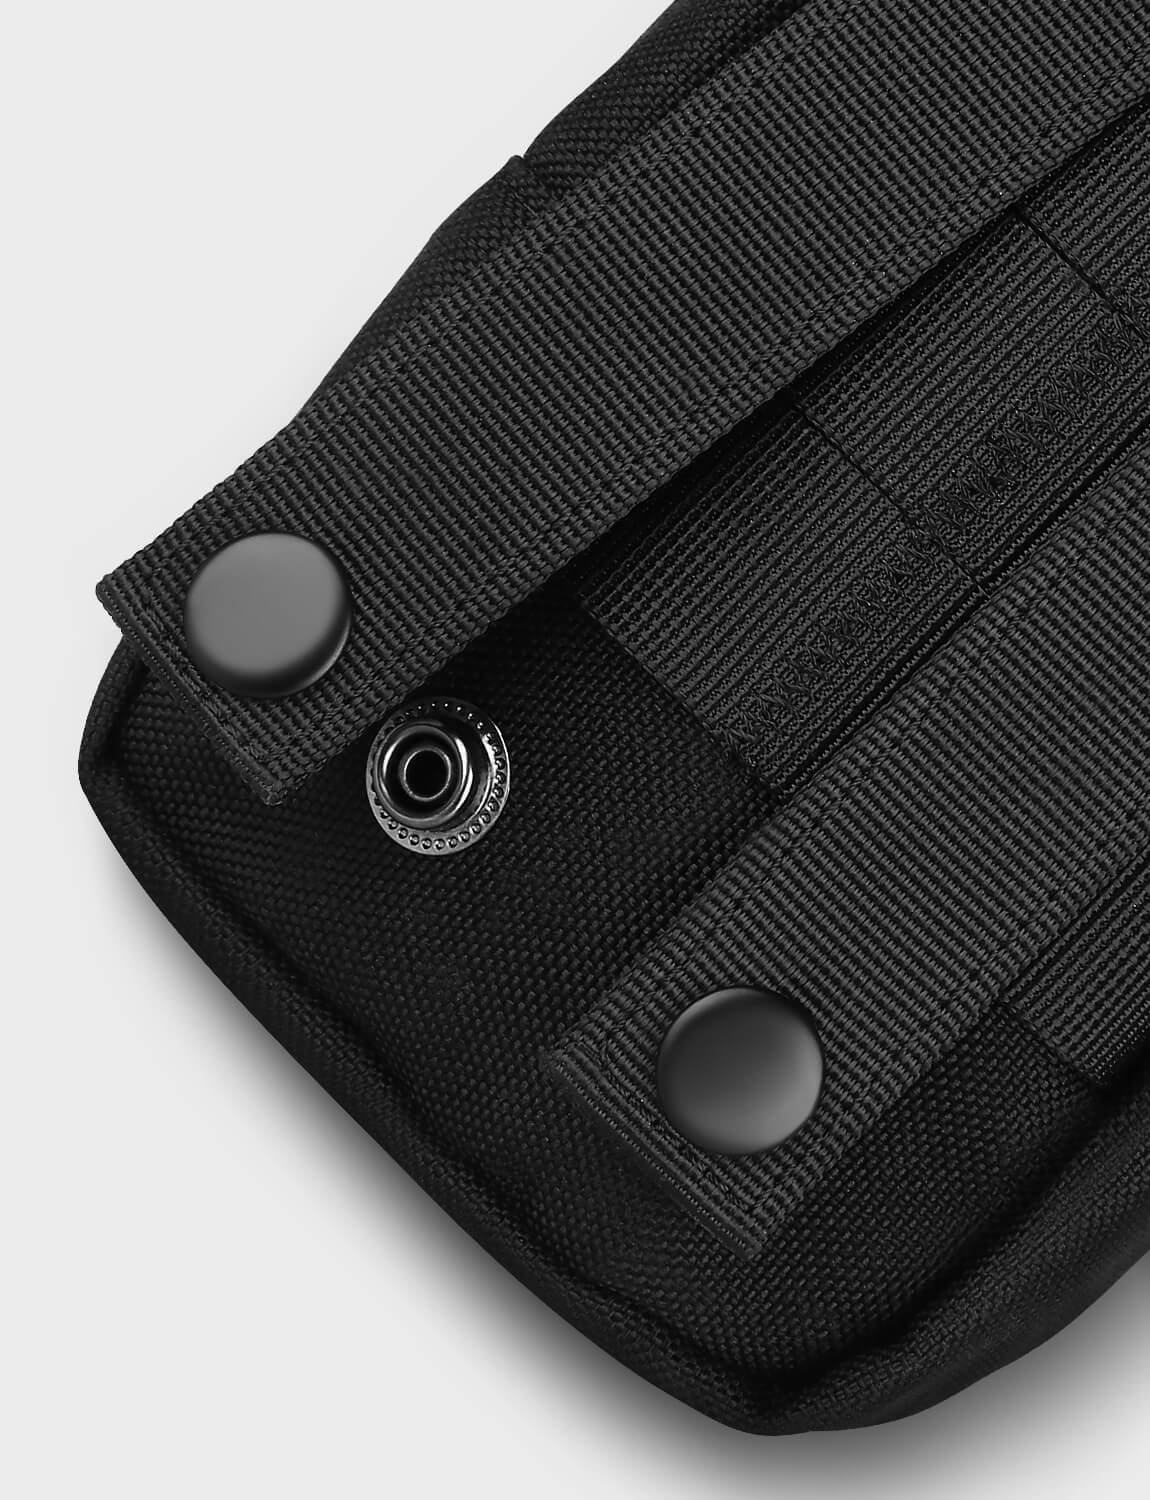 BOBLOV Body Camera Case Protection Pouch for All Brands of Body Cameras in Black6